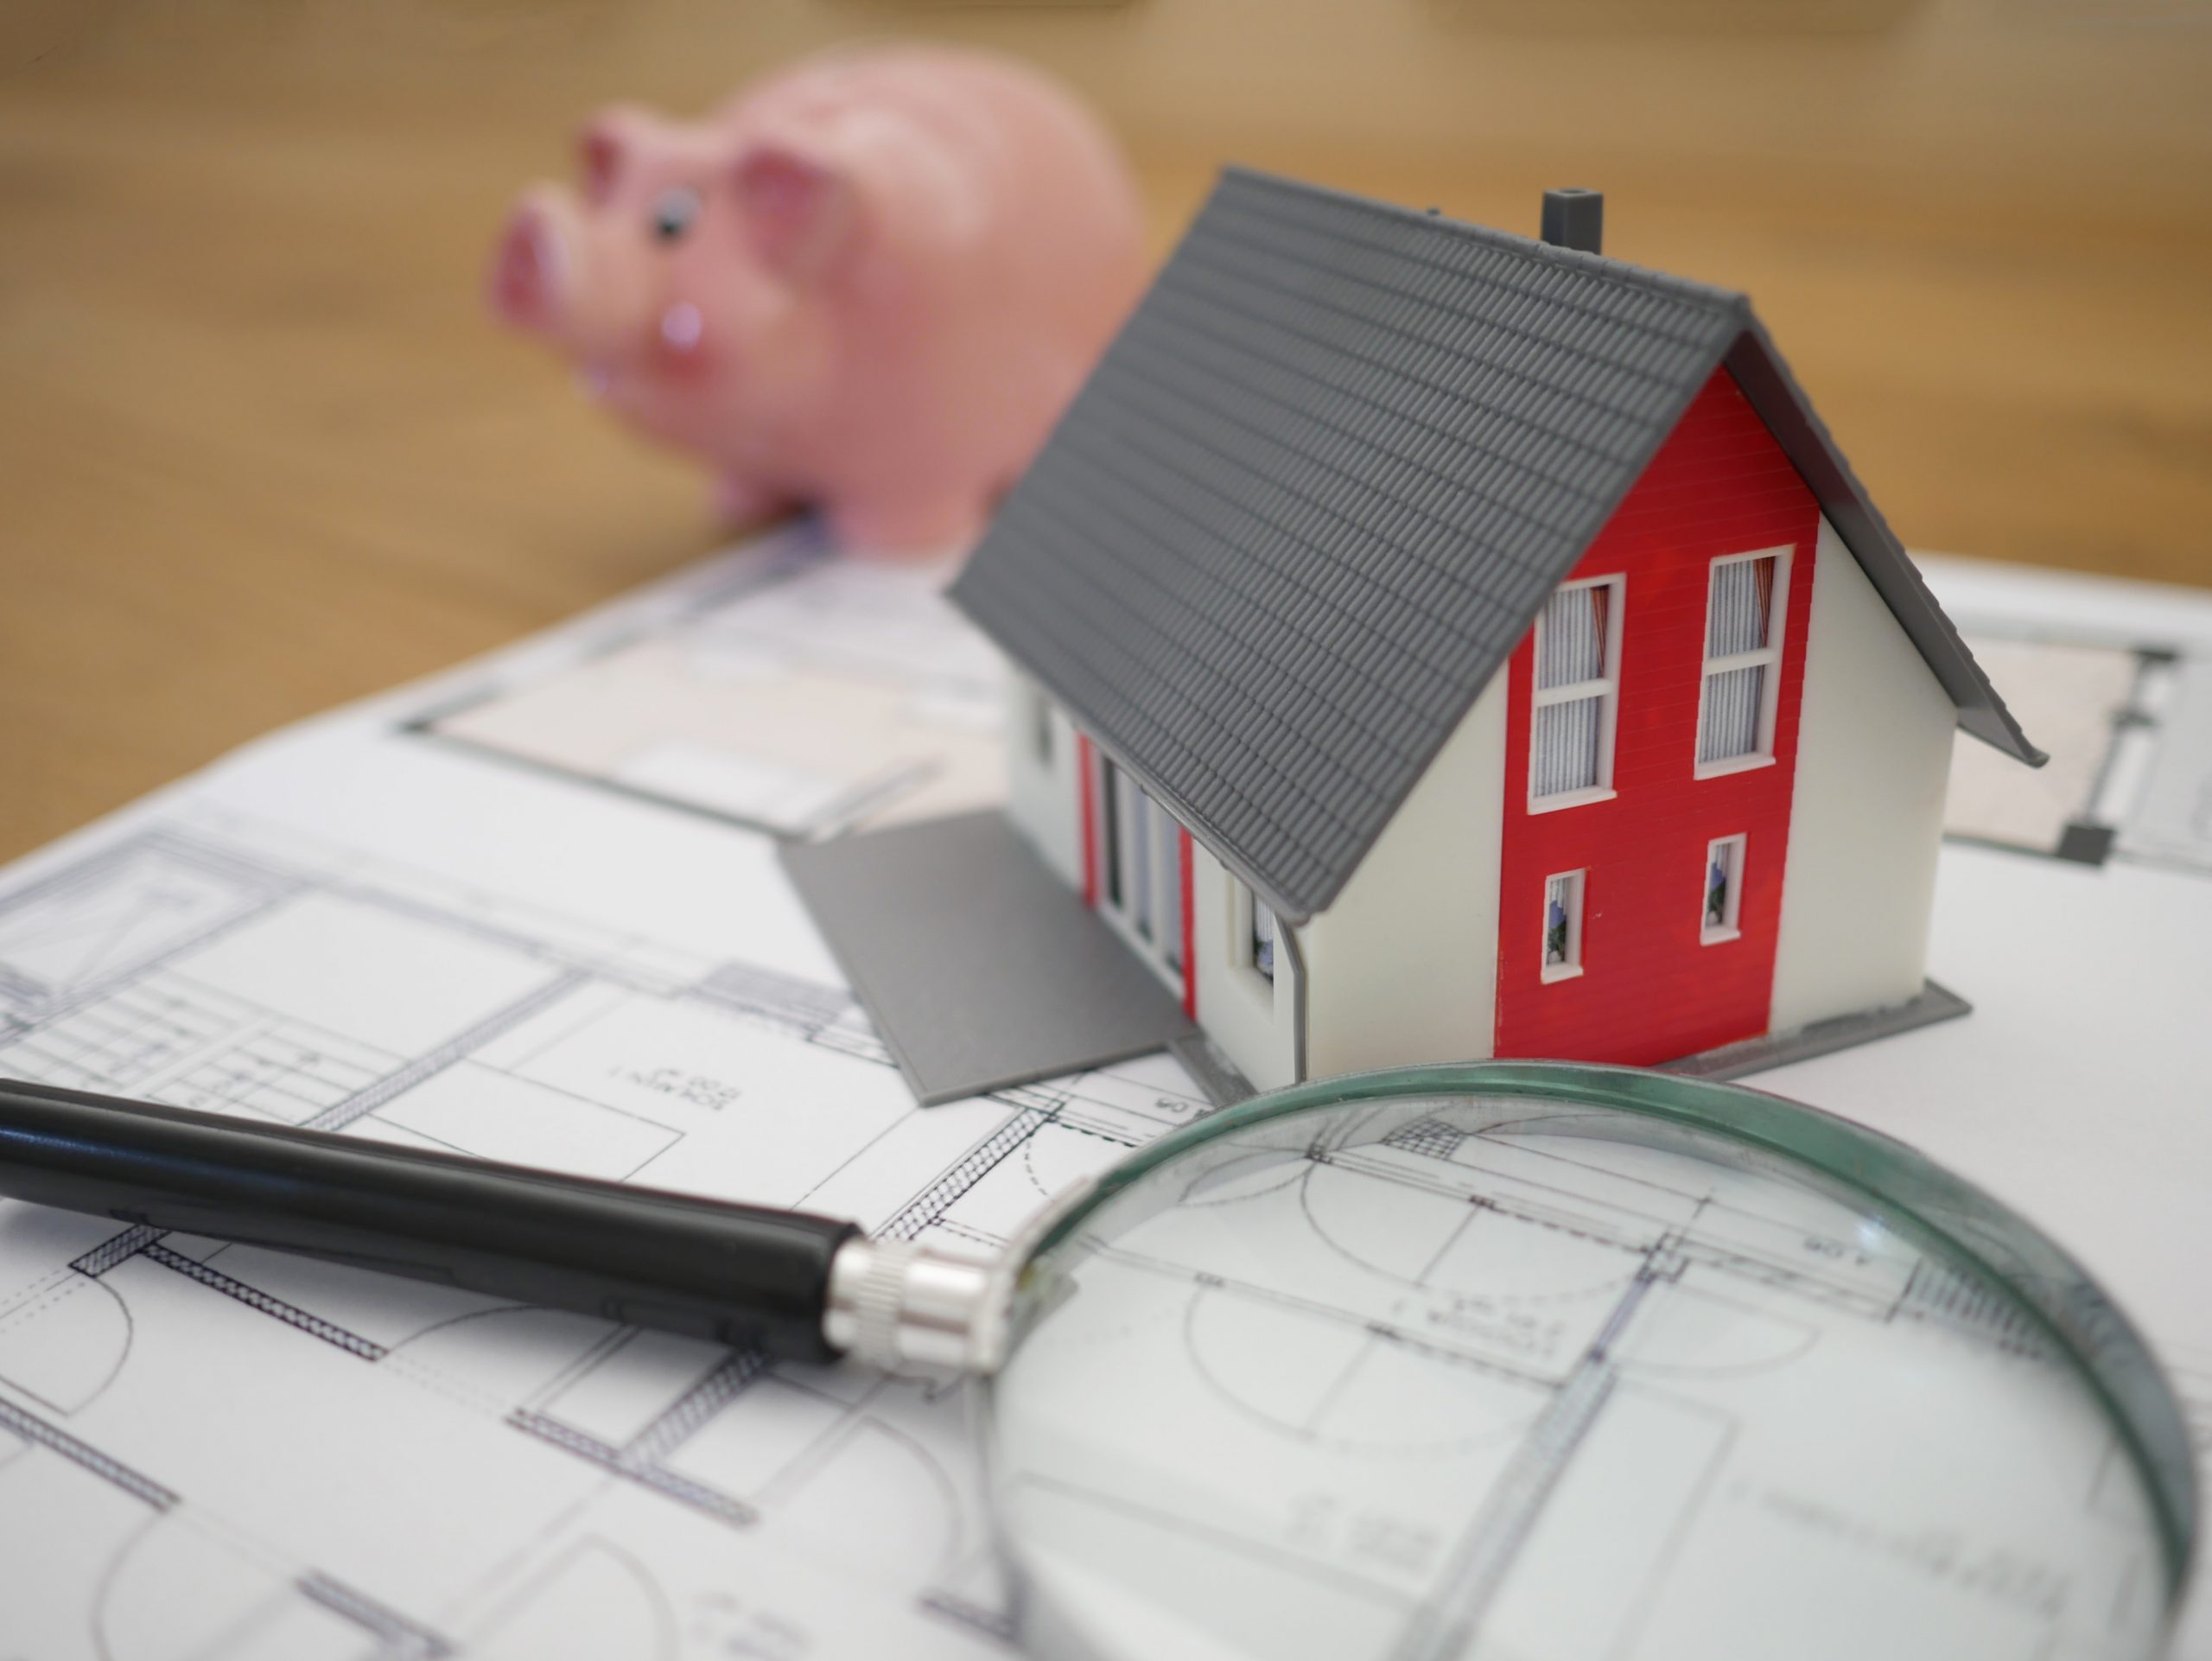 Magnifying glass and miniature house sitting on house blueprints with blurry piggy bank in background